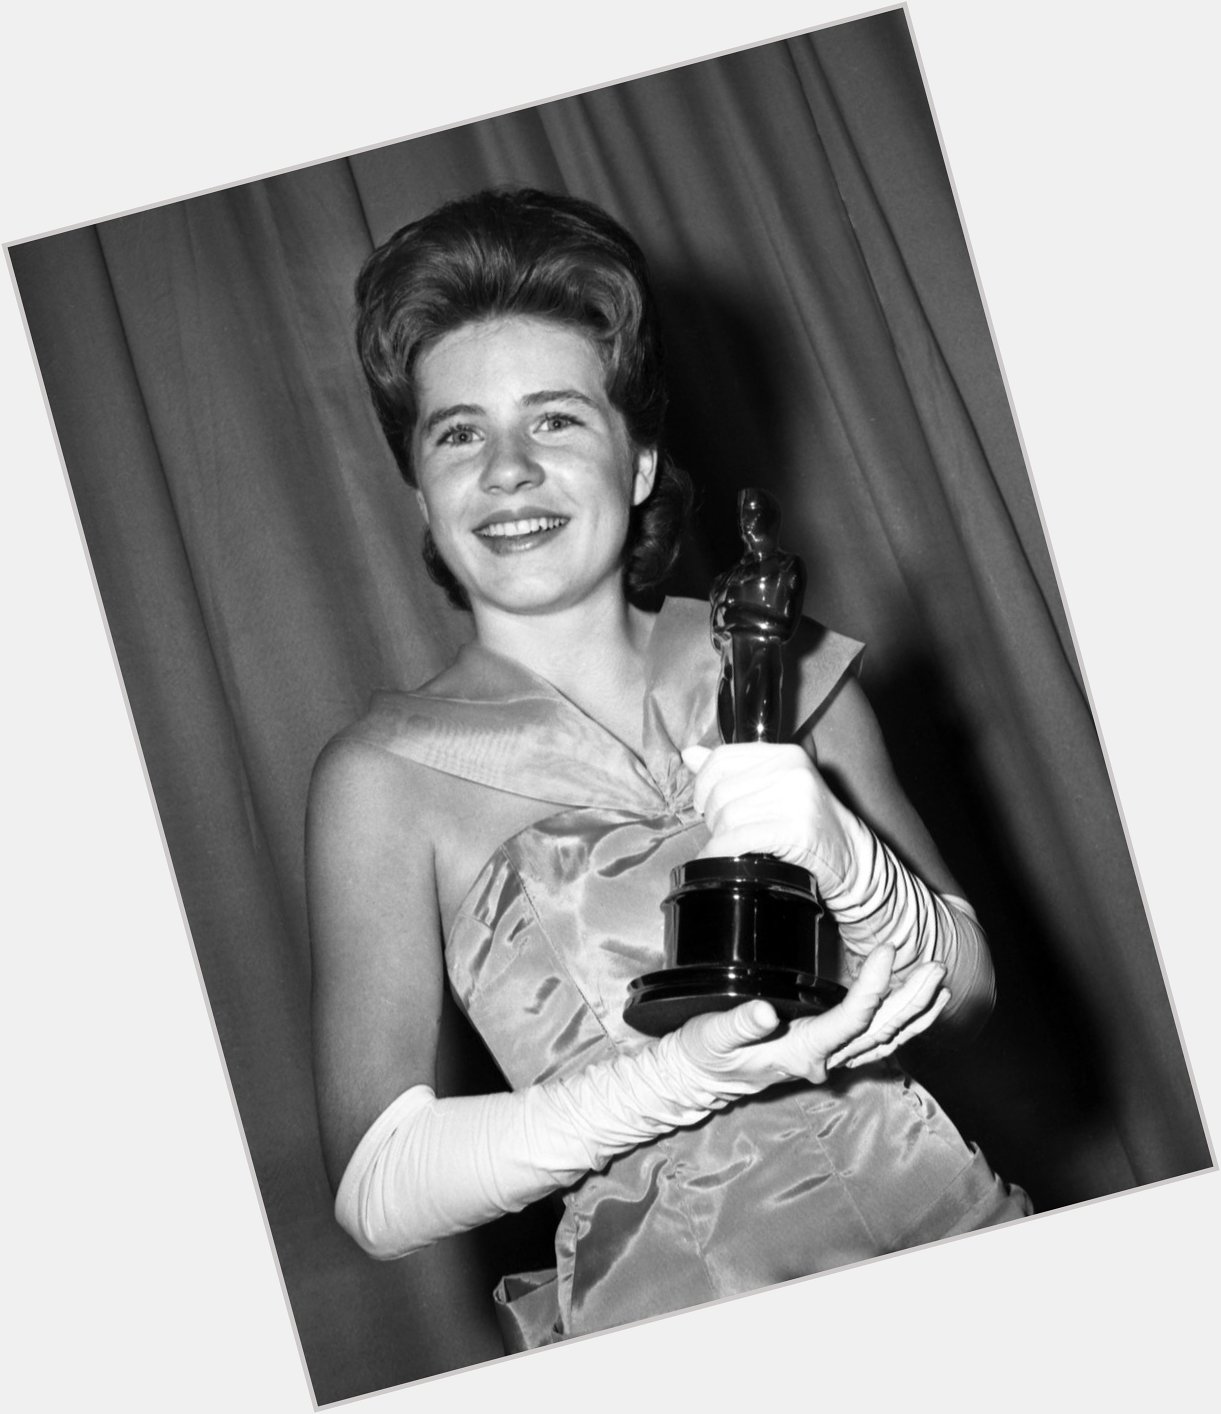 Happy Birthday to Patty Duke, who would have turned 71 today! 